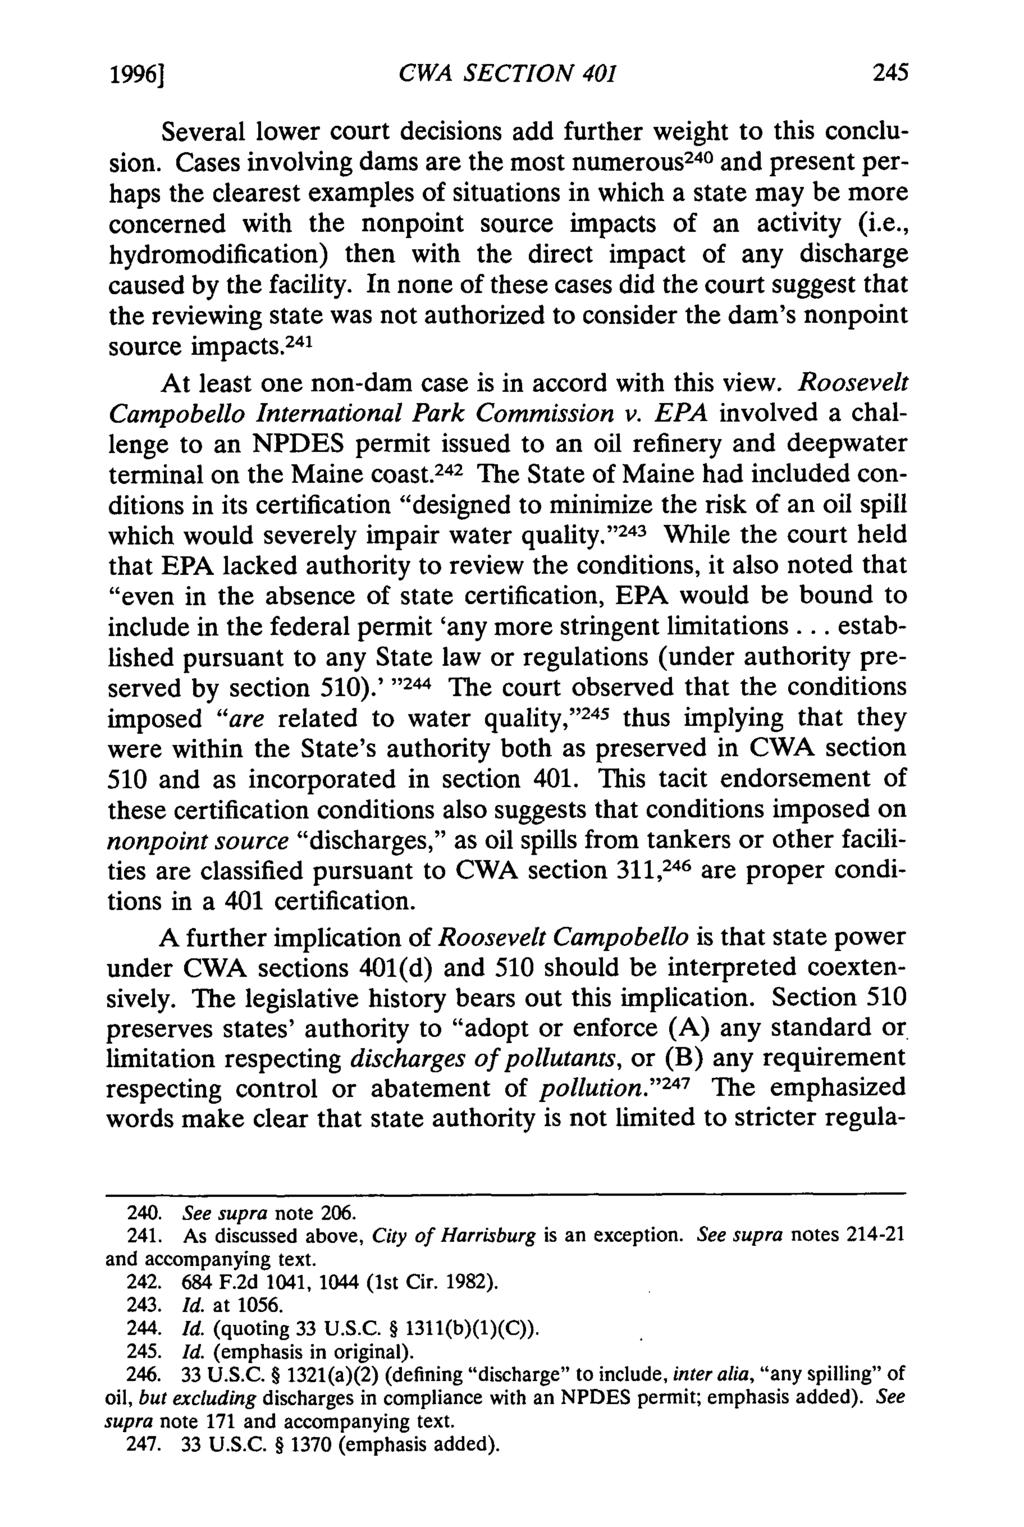 1996] CWA SECTION 401 Several lower court decisions add further weight to this conclusion.